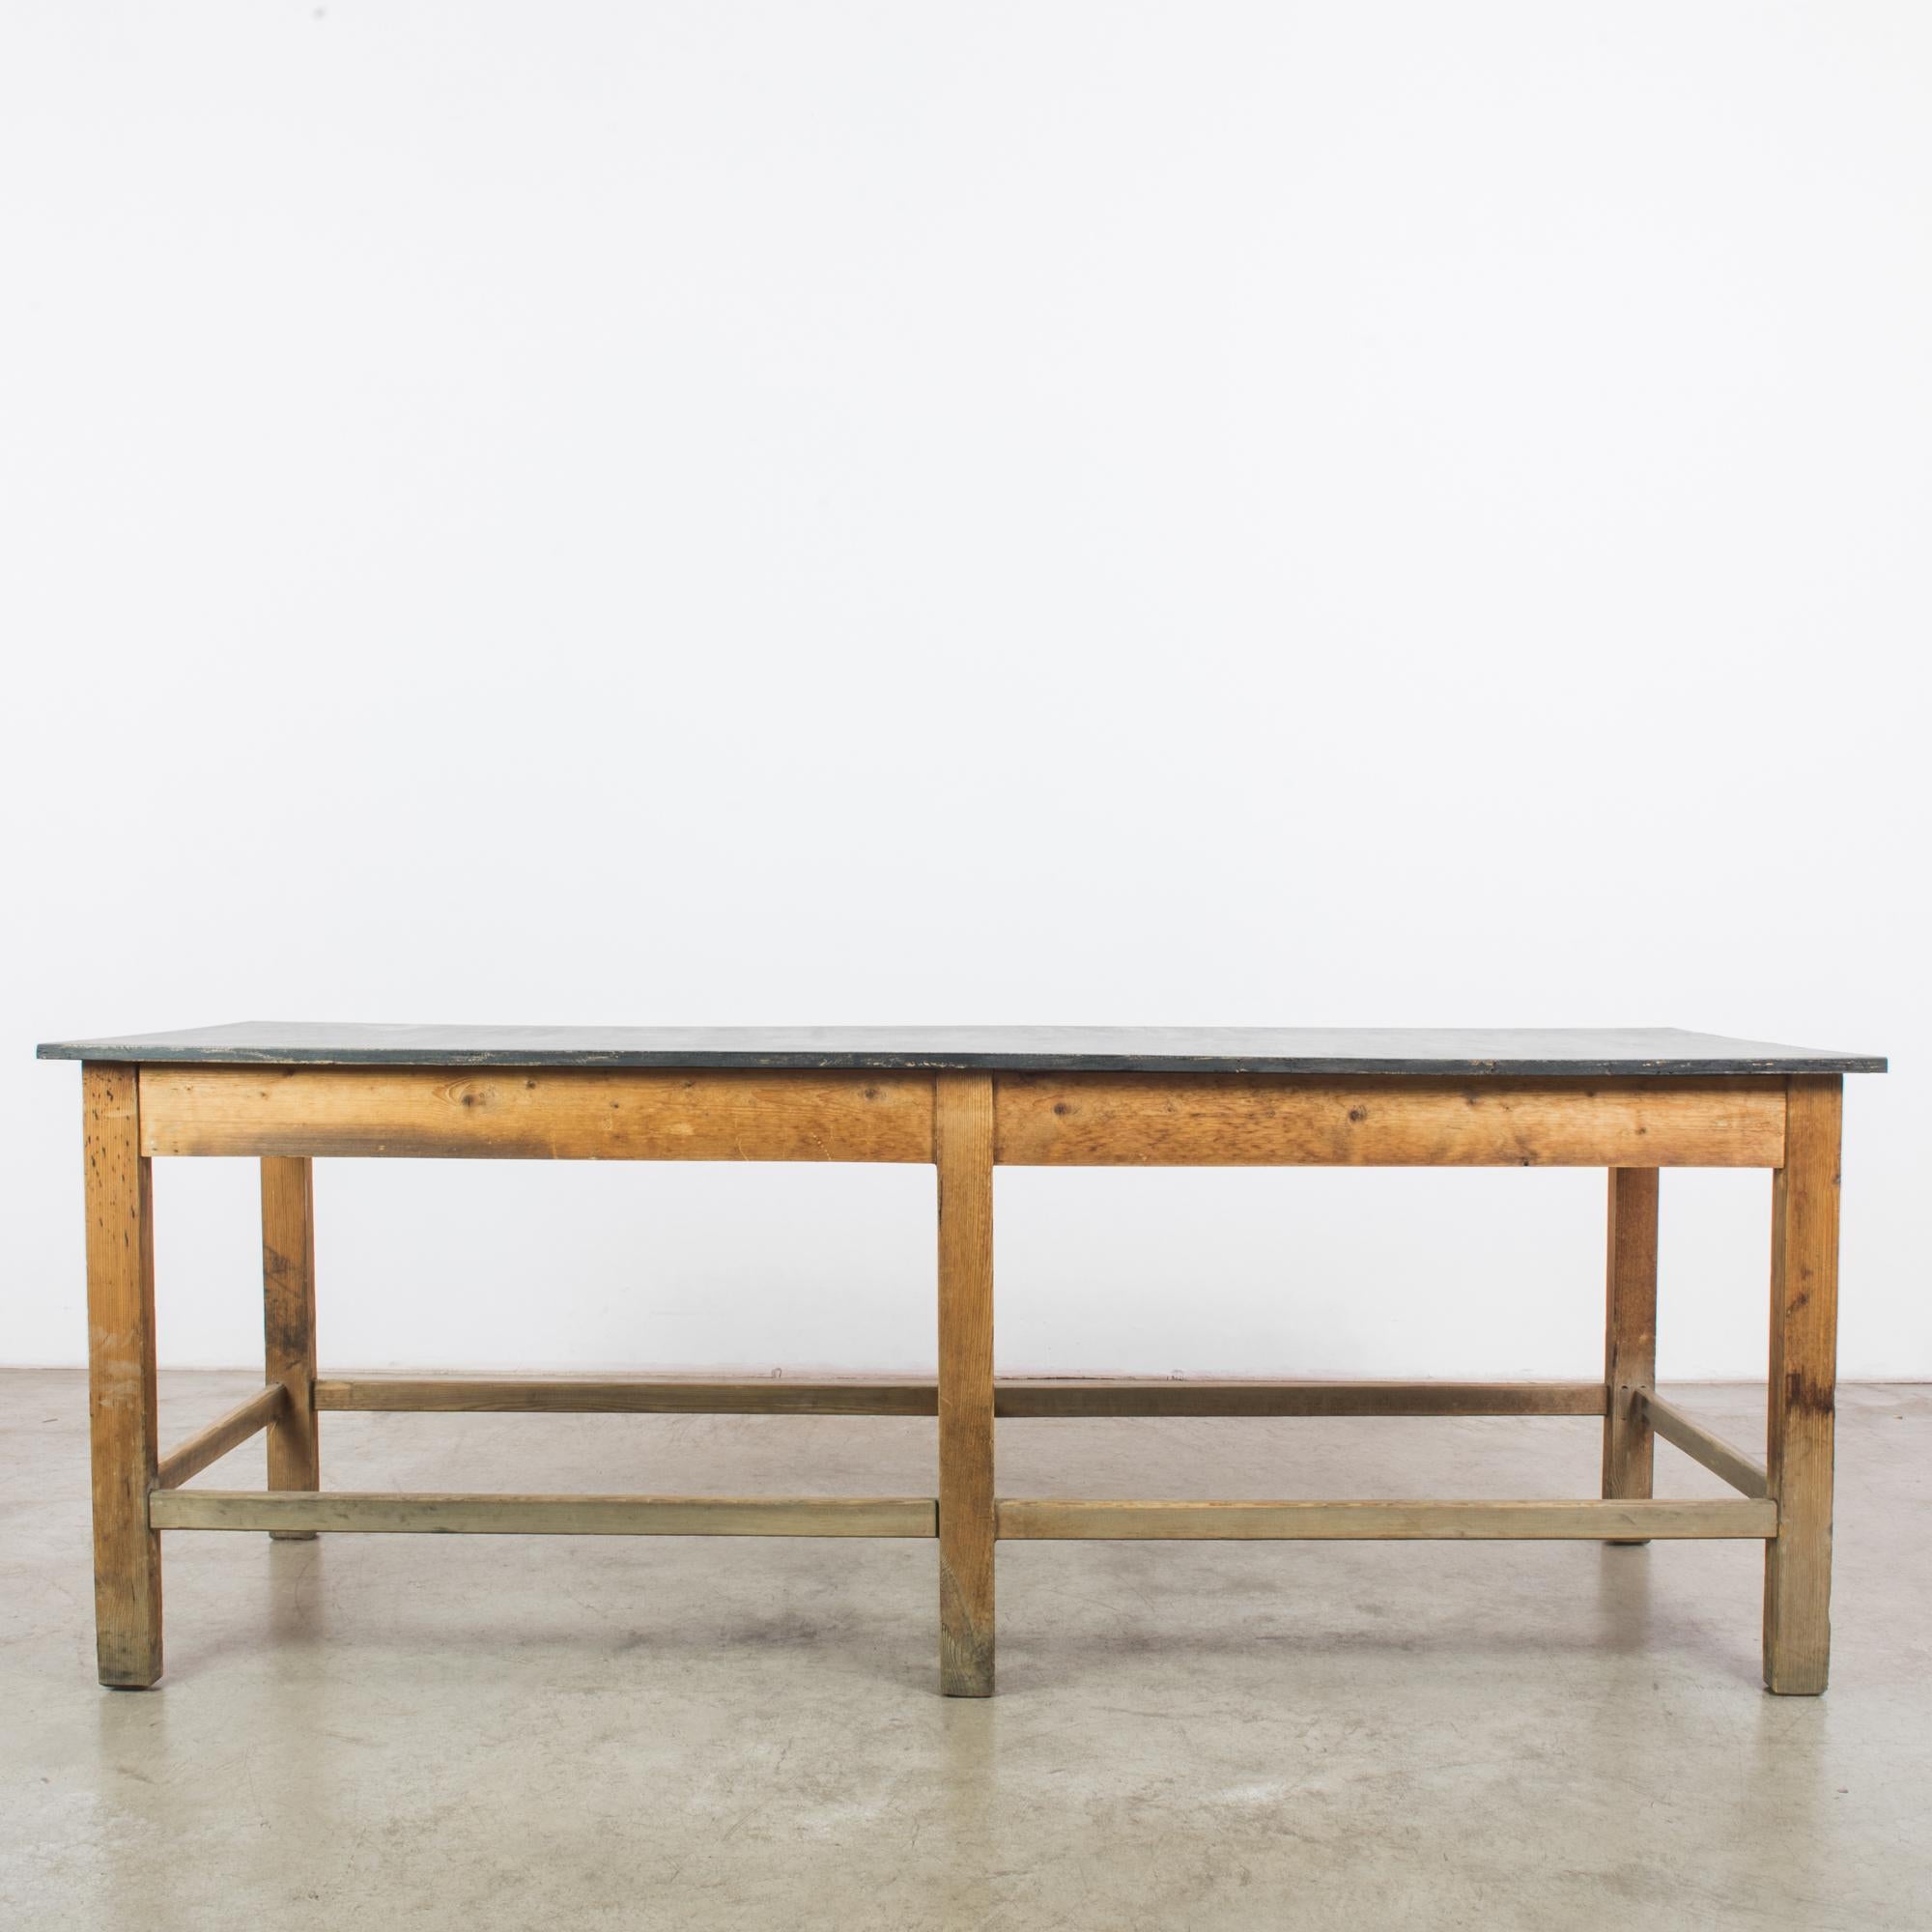 A wooden table from Czechia, circa 1960. Understated and stylish. The right-angled frame creates a grid-like, industrial aesthetic, warmed by the bright honeyed tone of the wood. The black paint of the tabletop has weathered with age, lending the